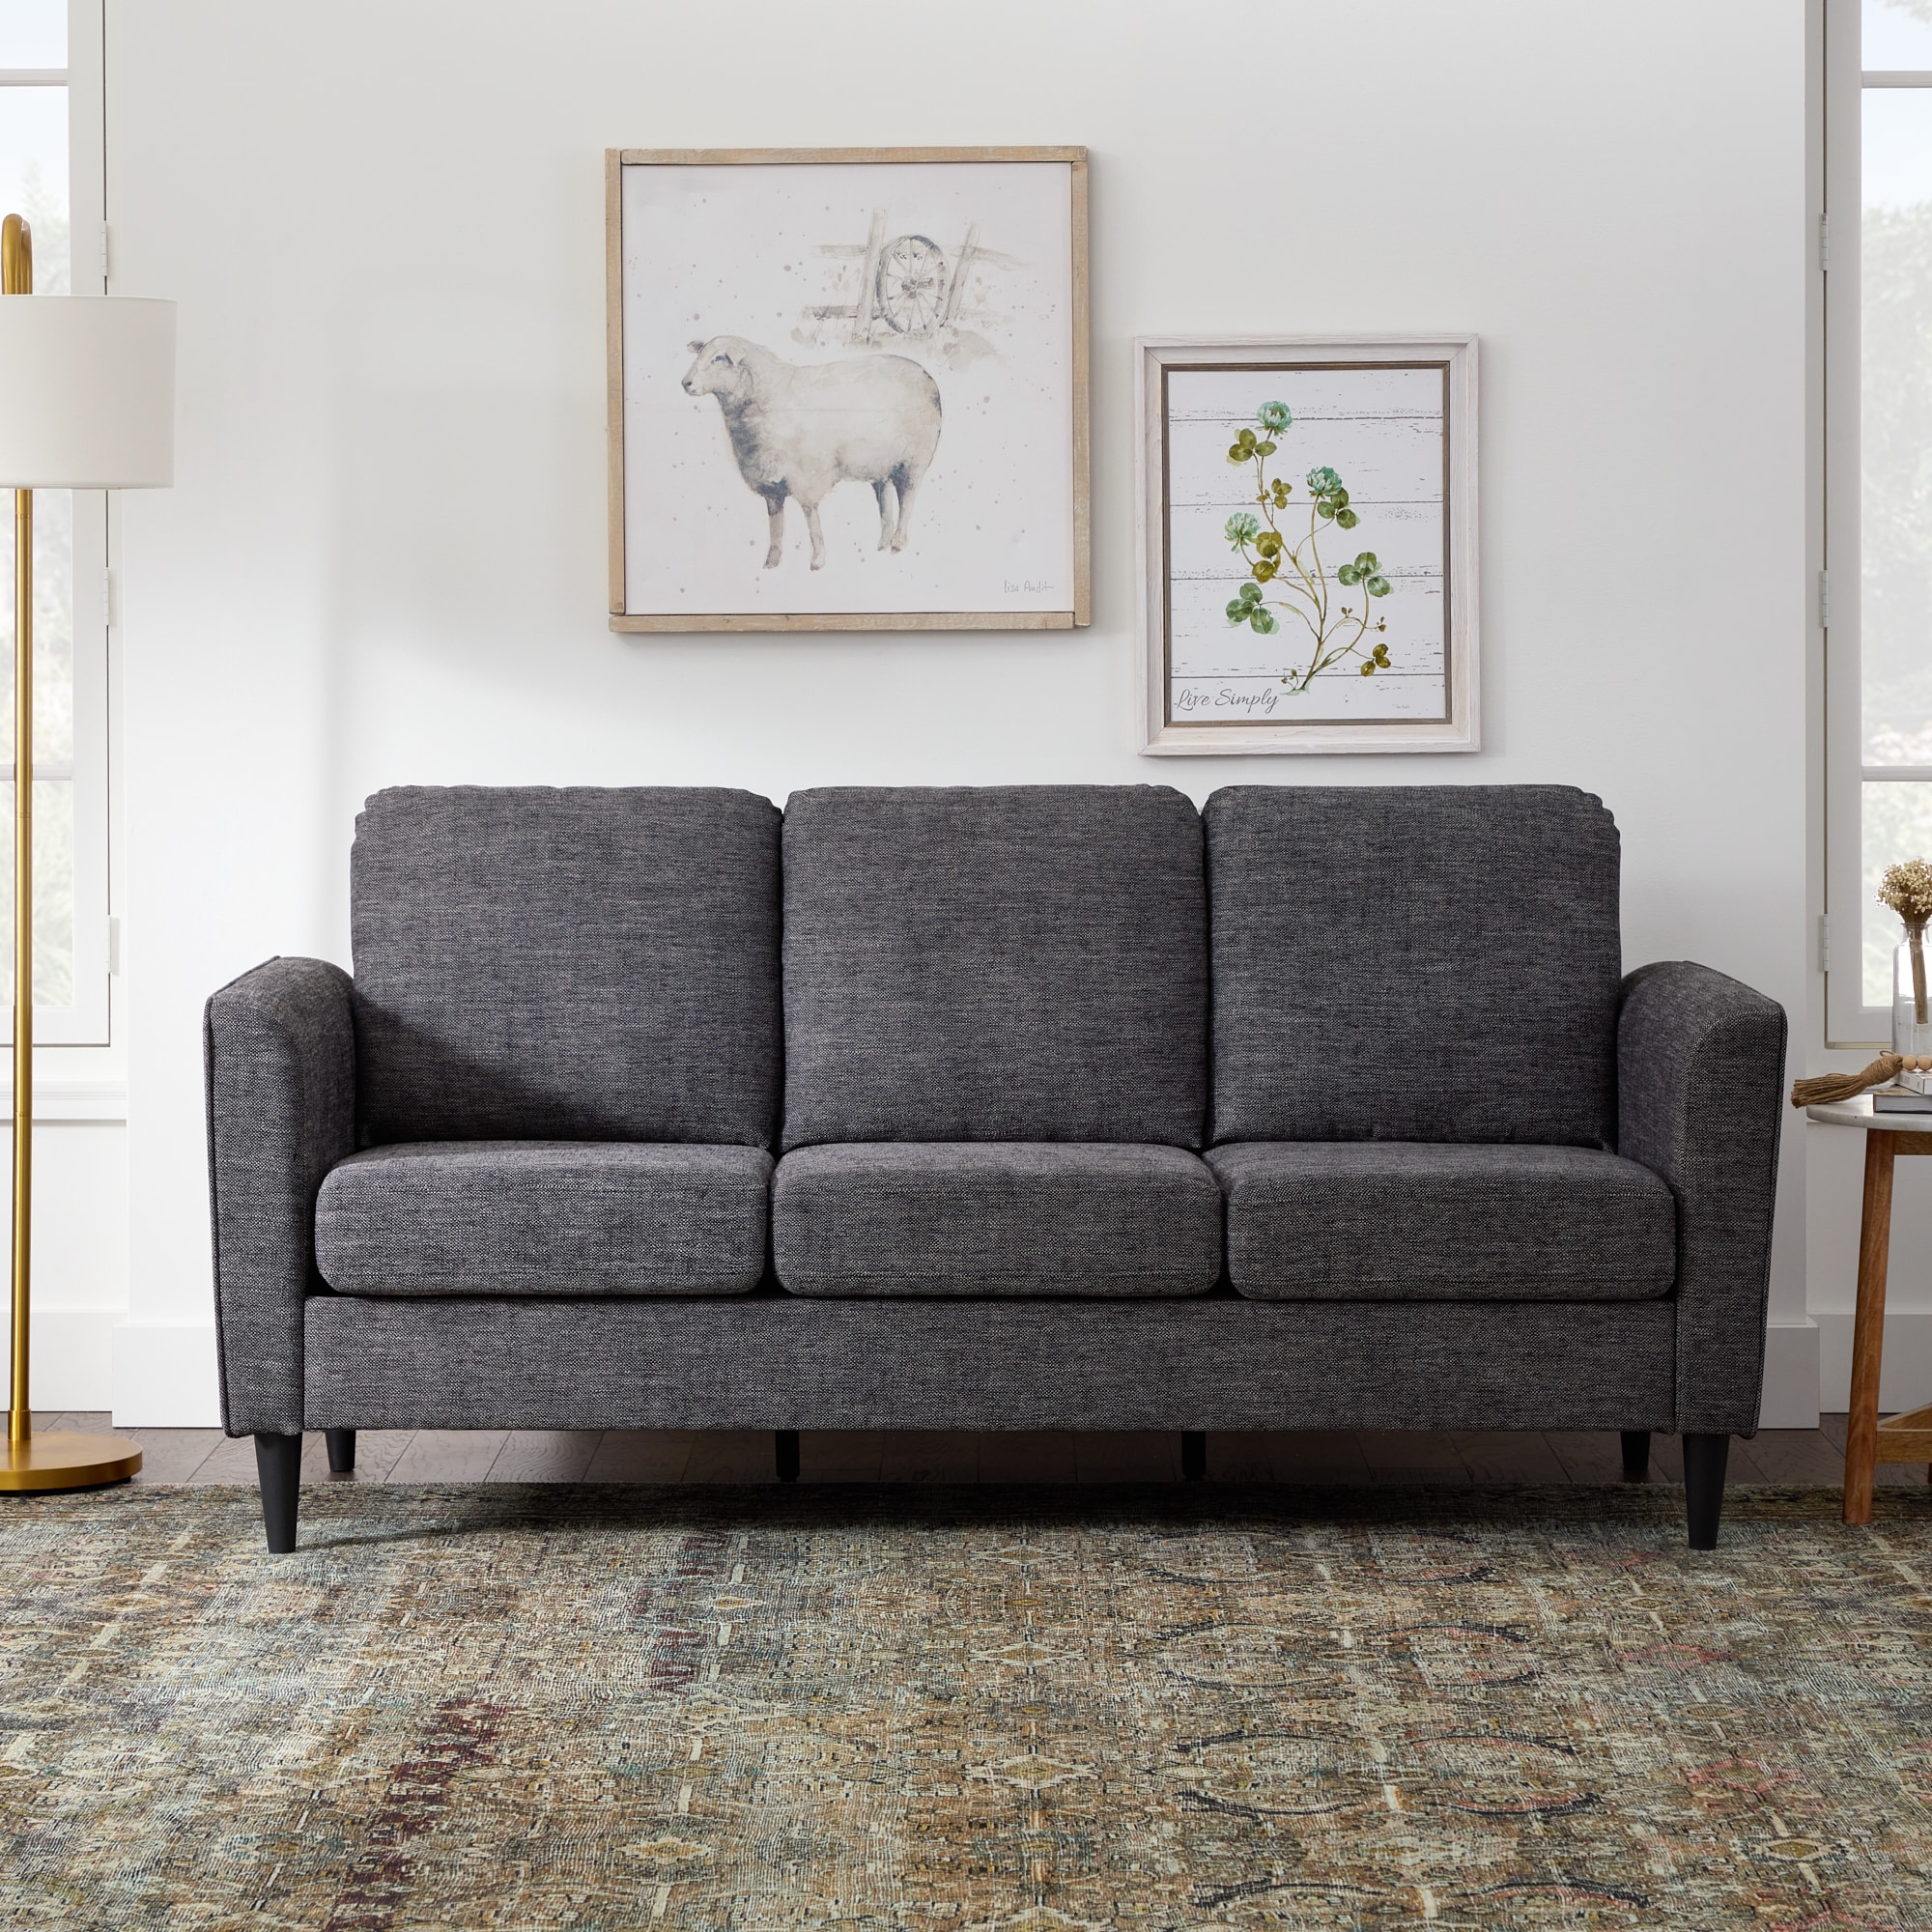 Brookside Clara 72 83 In Modern Charcoal Polyester Blend 3 Seater Sofa The Couches Sofas Loveseats Department At Lowes Com